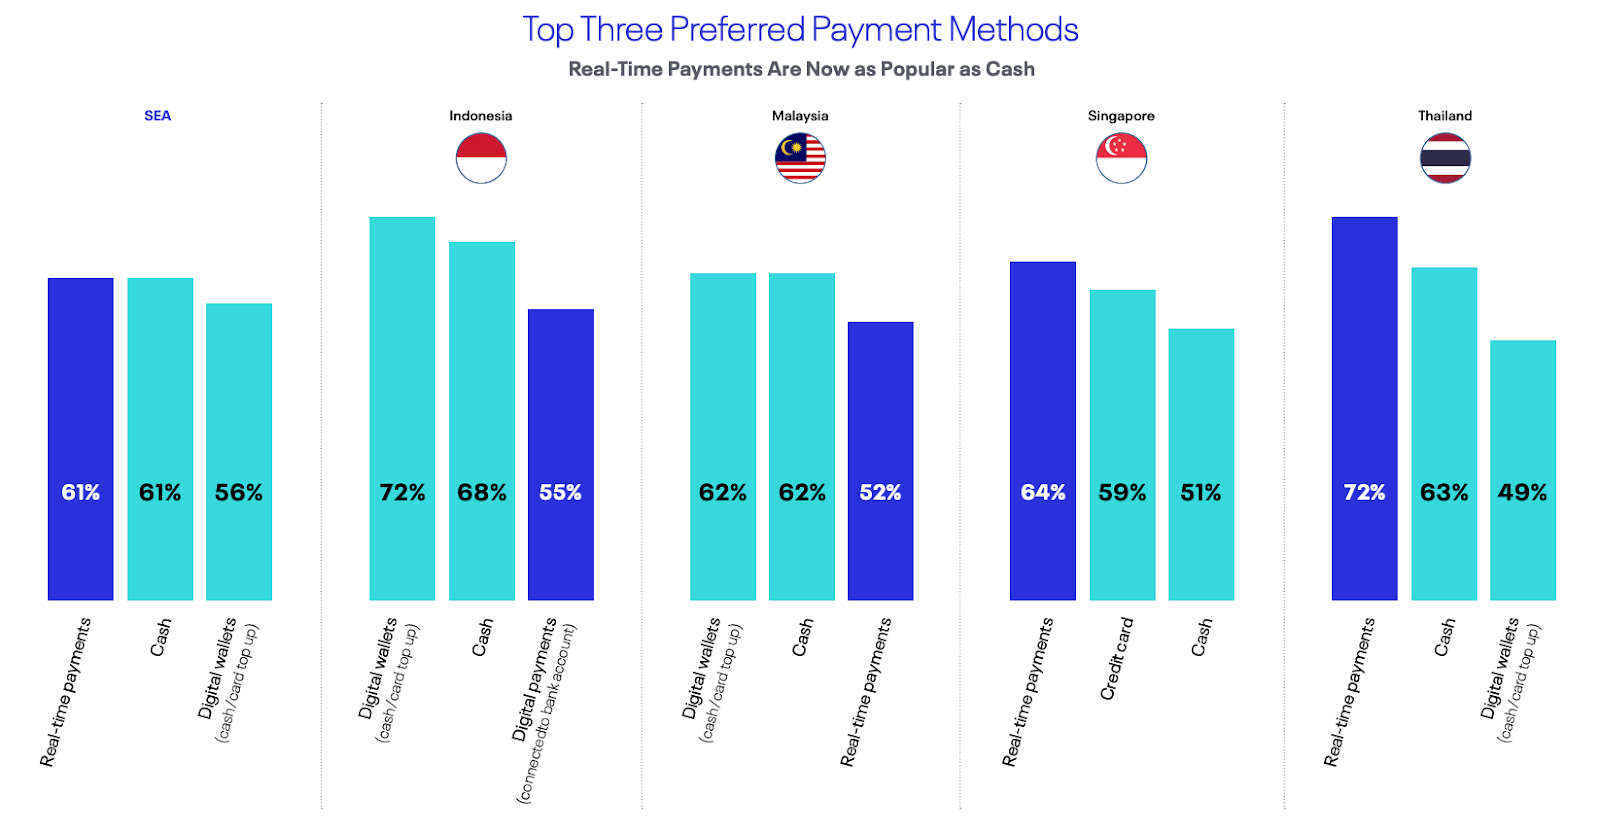 Top three preferred payment methods in key Southeast Asian markets, Source- Real-Time Goes Mainstream, ACI Worldwide, 2021